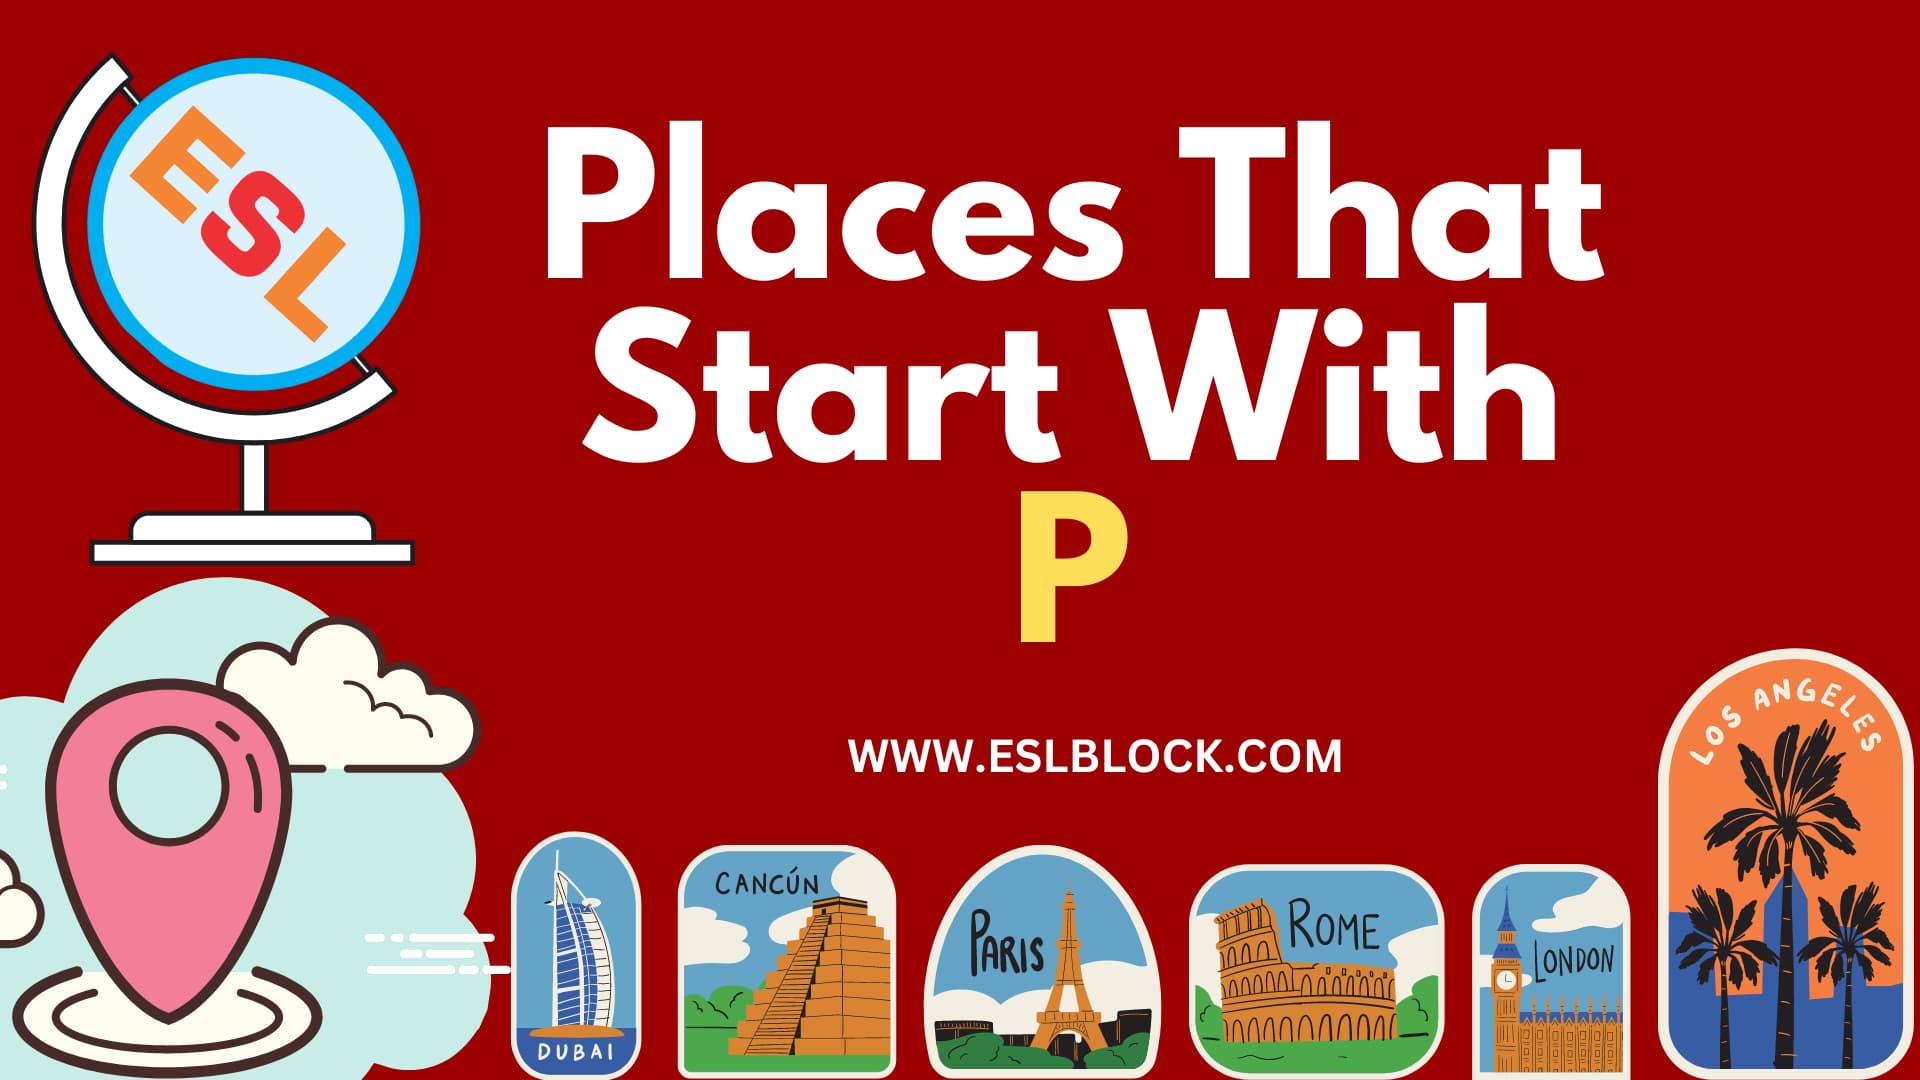 4 Letter Places, 5 Letter Places Starting With P, English, English Grammar, English Vocabulary, English Words, List of Places That Start With P, P Places, P Places in English, P Places Names, Places List, Places Names, Places That Start With P, Vocabulary, Words That Start With P